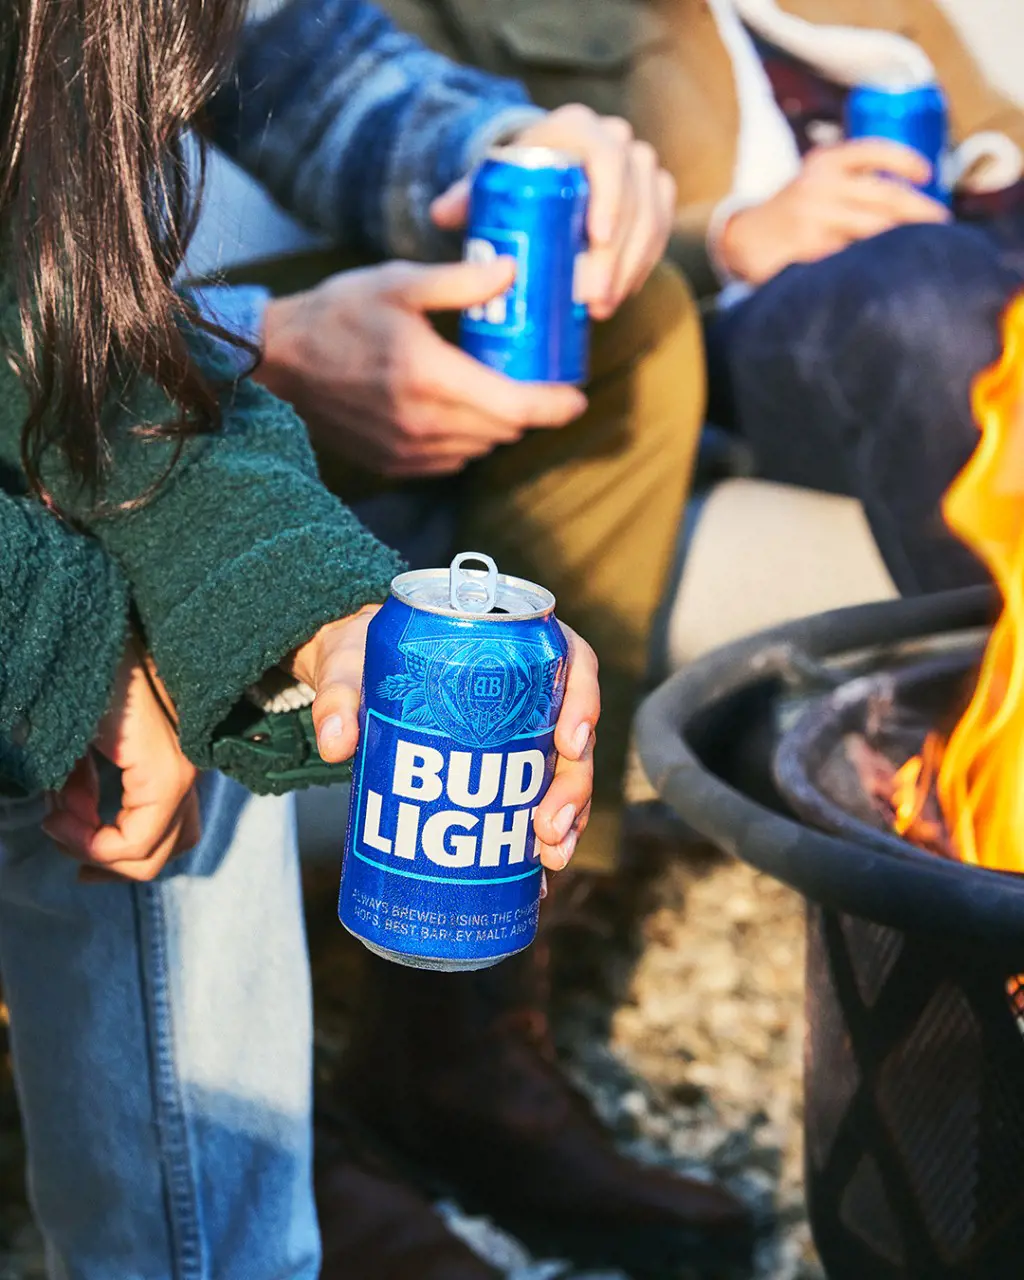 Portrait from budlight's Instagram page featuring the product